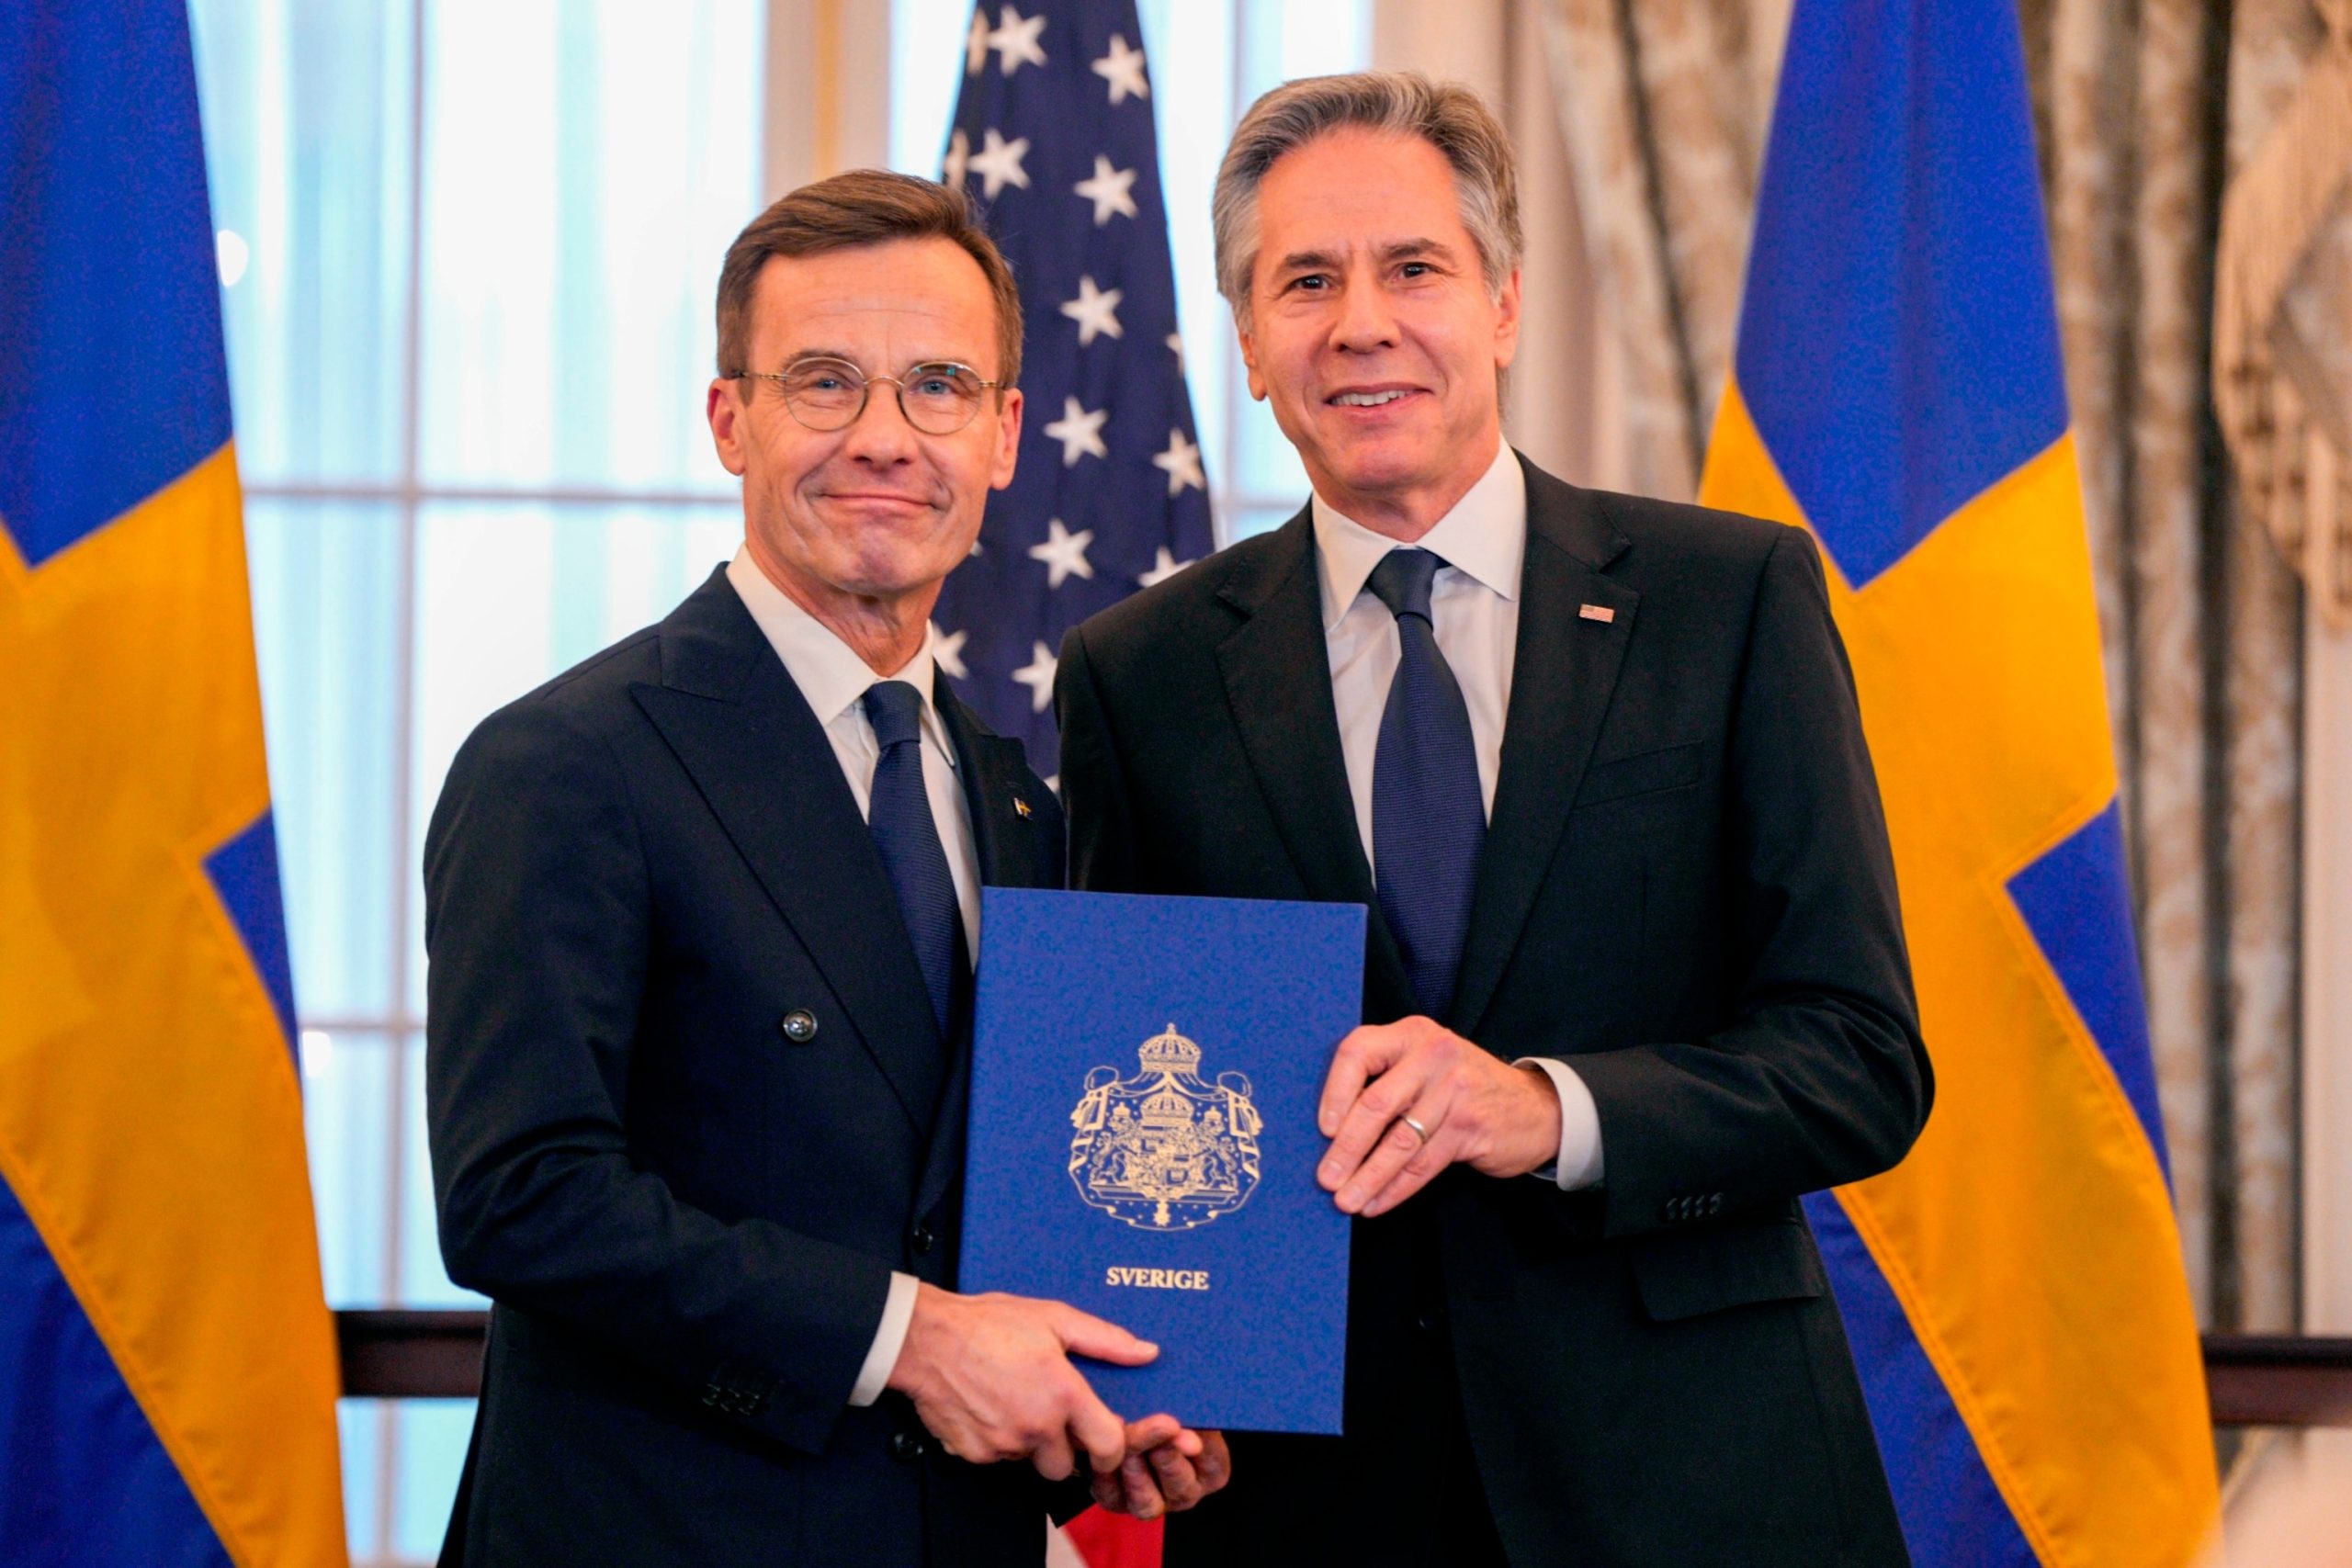 Sweden's official membership in NATO marks the end of longstanding military neutrality following a delayed process.